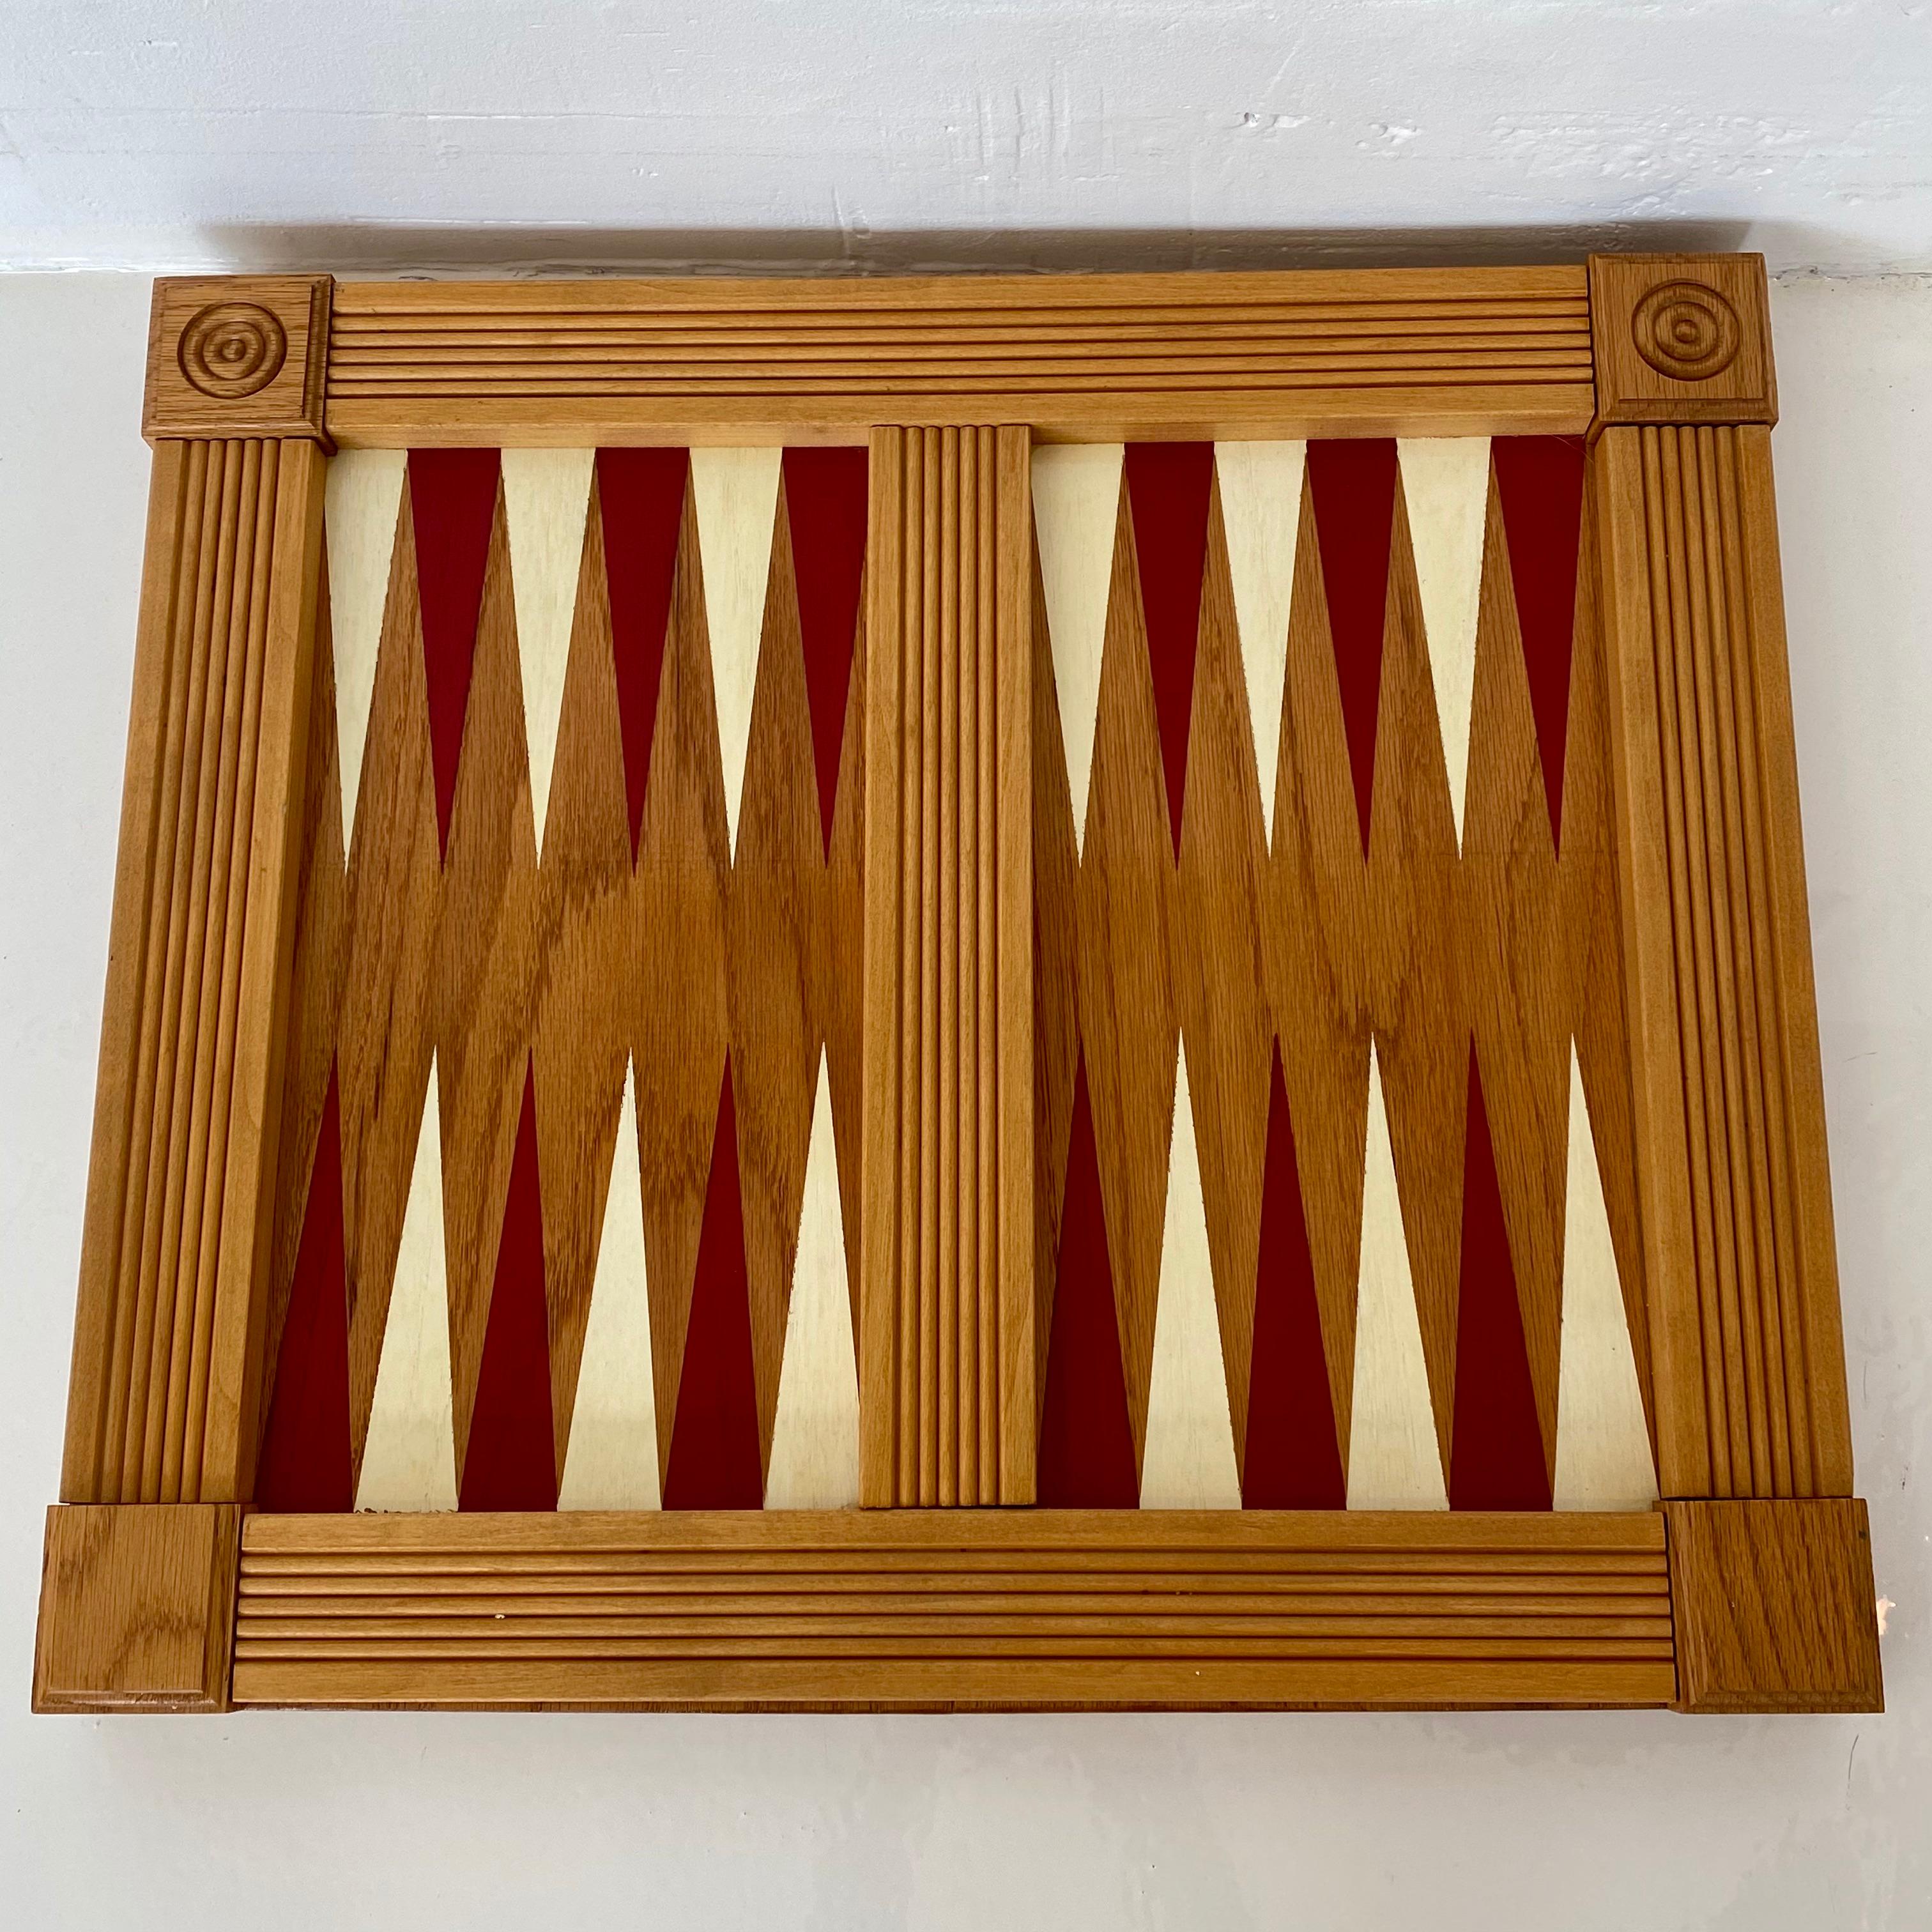 Vintage backgammon board. Heavy wood board made by hand. Hand painted triangles in red and white. Good vintage condition.